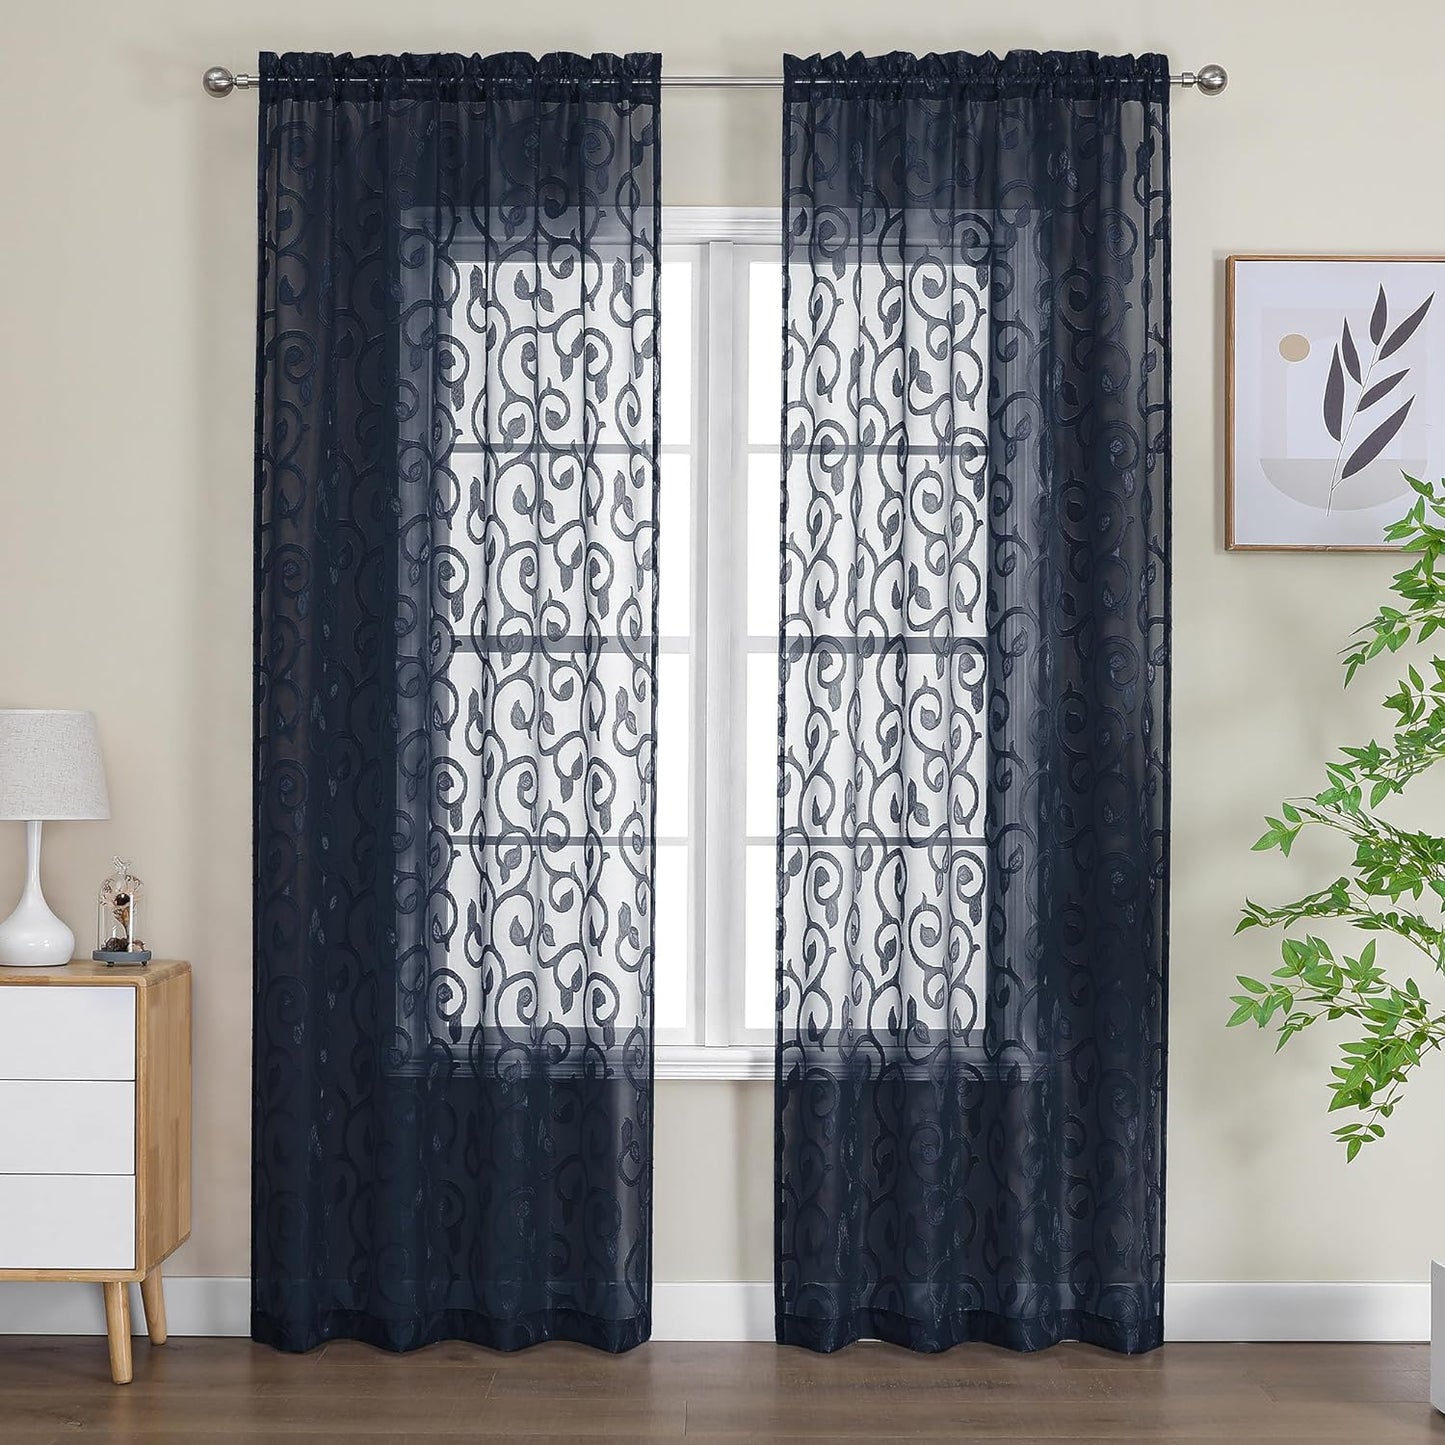 OWENIE Furman Sheer White Curtains 84 Inches Long for Bedroom Living Room 2 Panels Set, White Curtains Jacquard Clip Light Filtering Semi Sheer Curtain Transparent Rod Pocket Window Drapes, 2 Pcs  OWENIE Navy Blue 40W X 96L 